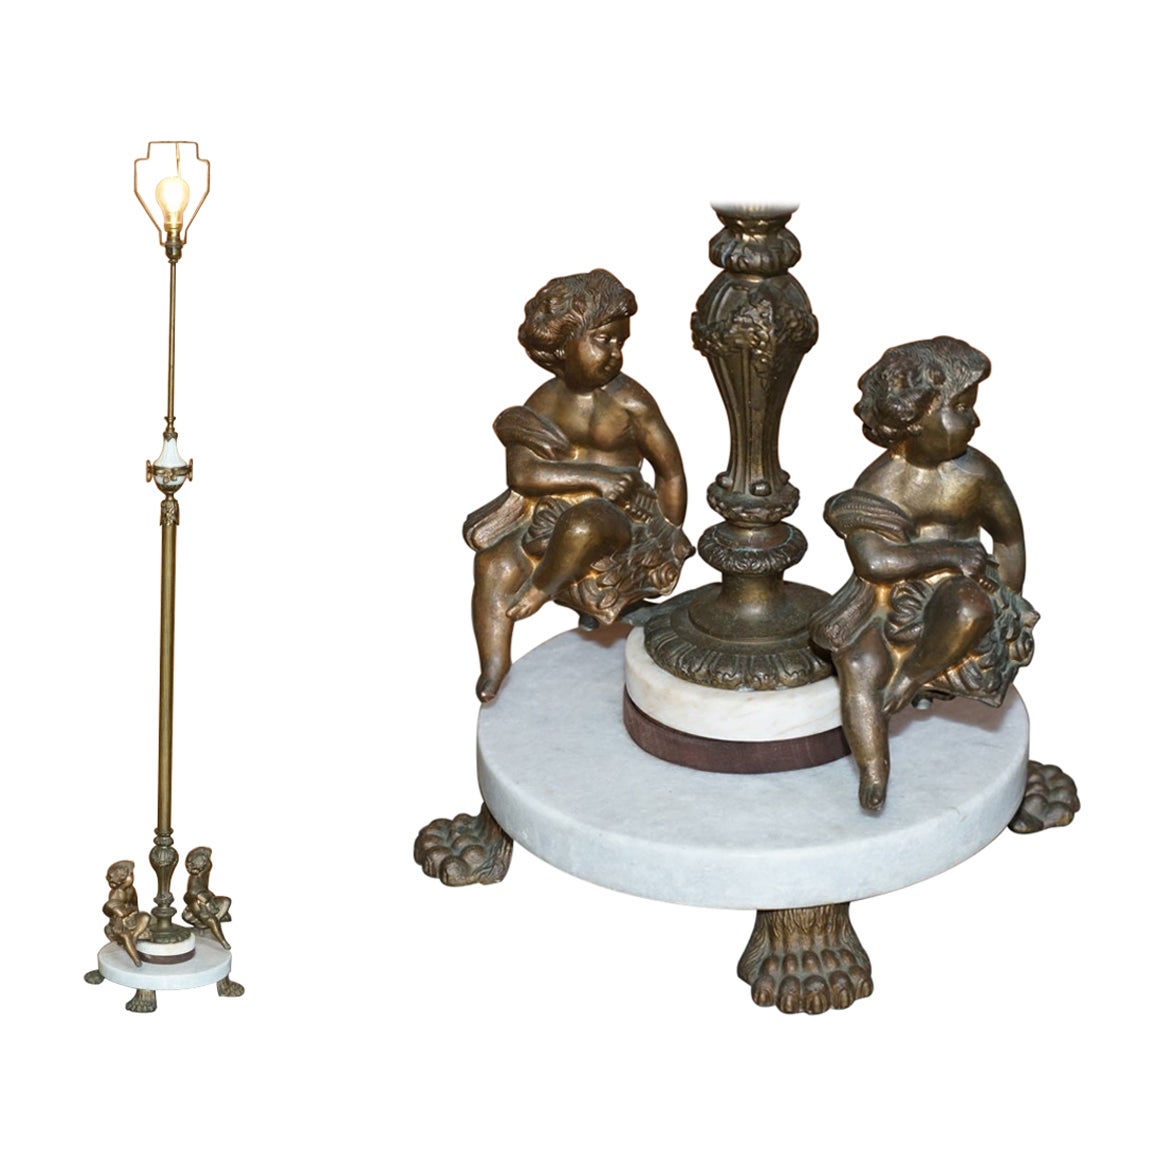 Lovely Circa 1920's Marble & Brass Floor Standing Lamp with Cherub Putti's Angel For Sale